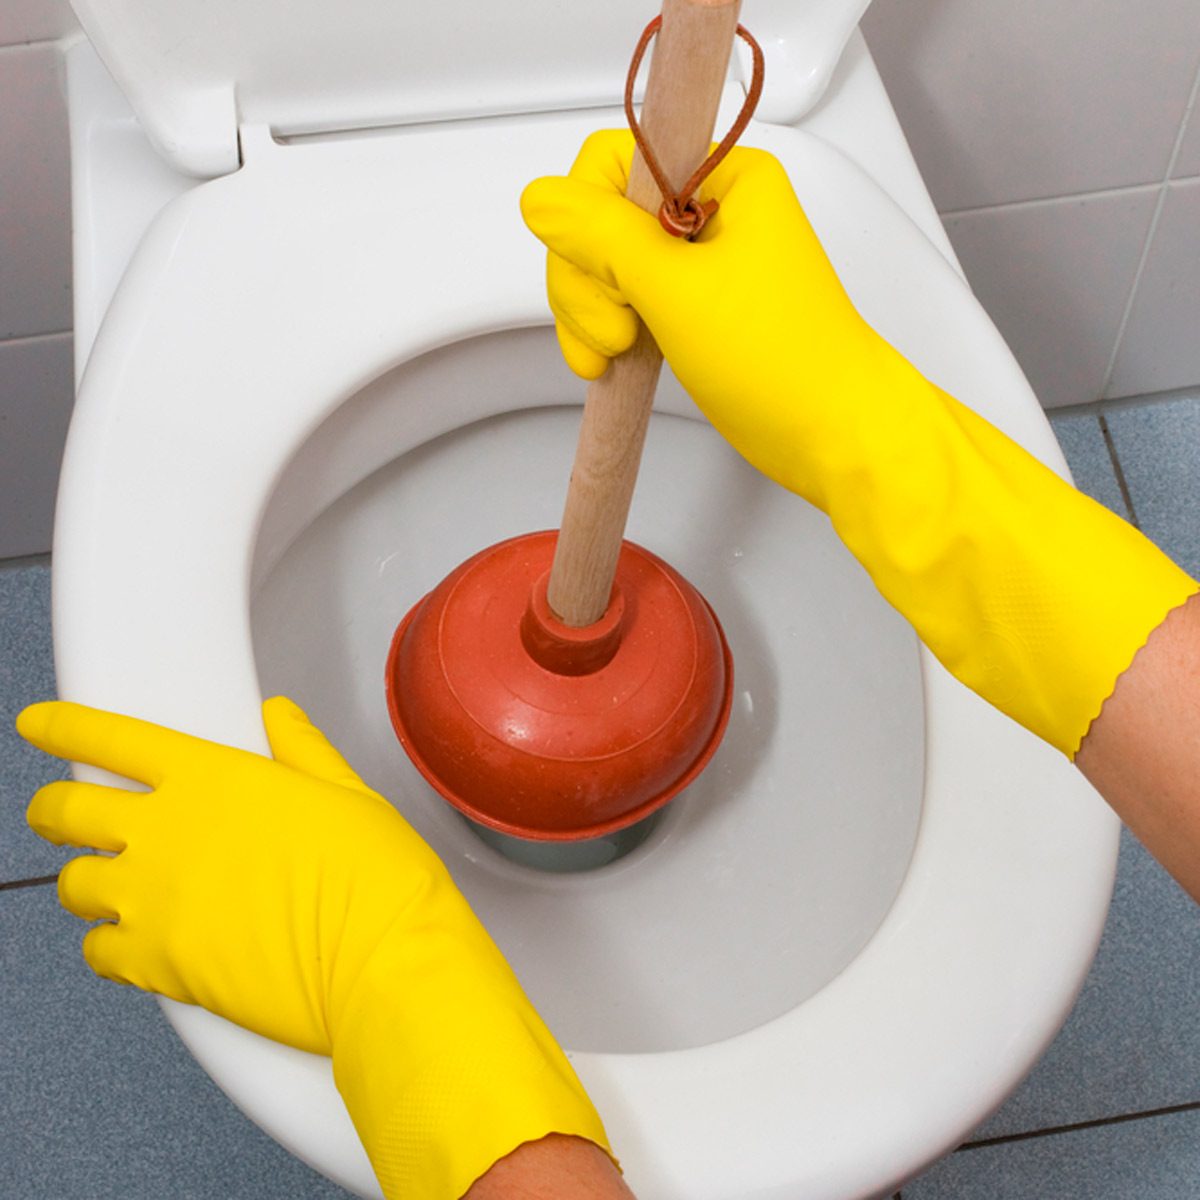 How To Use Your Toilet Plunger Correctly in 5 Easy Steps